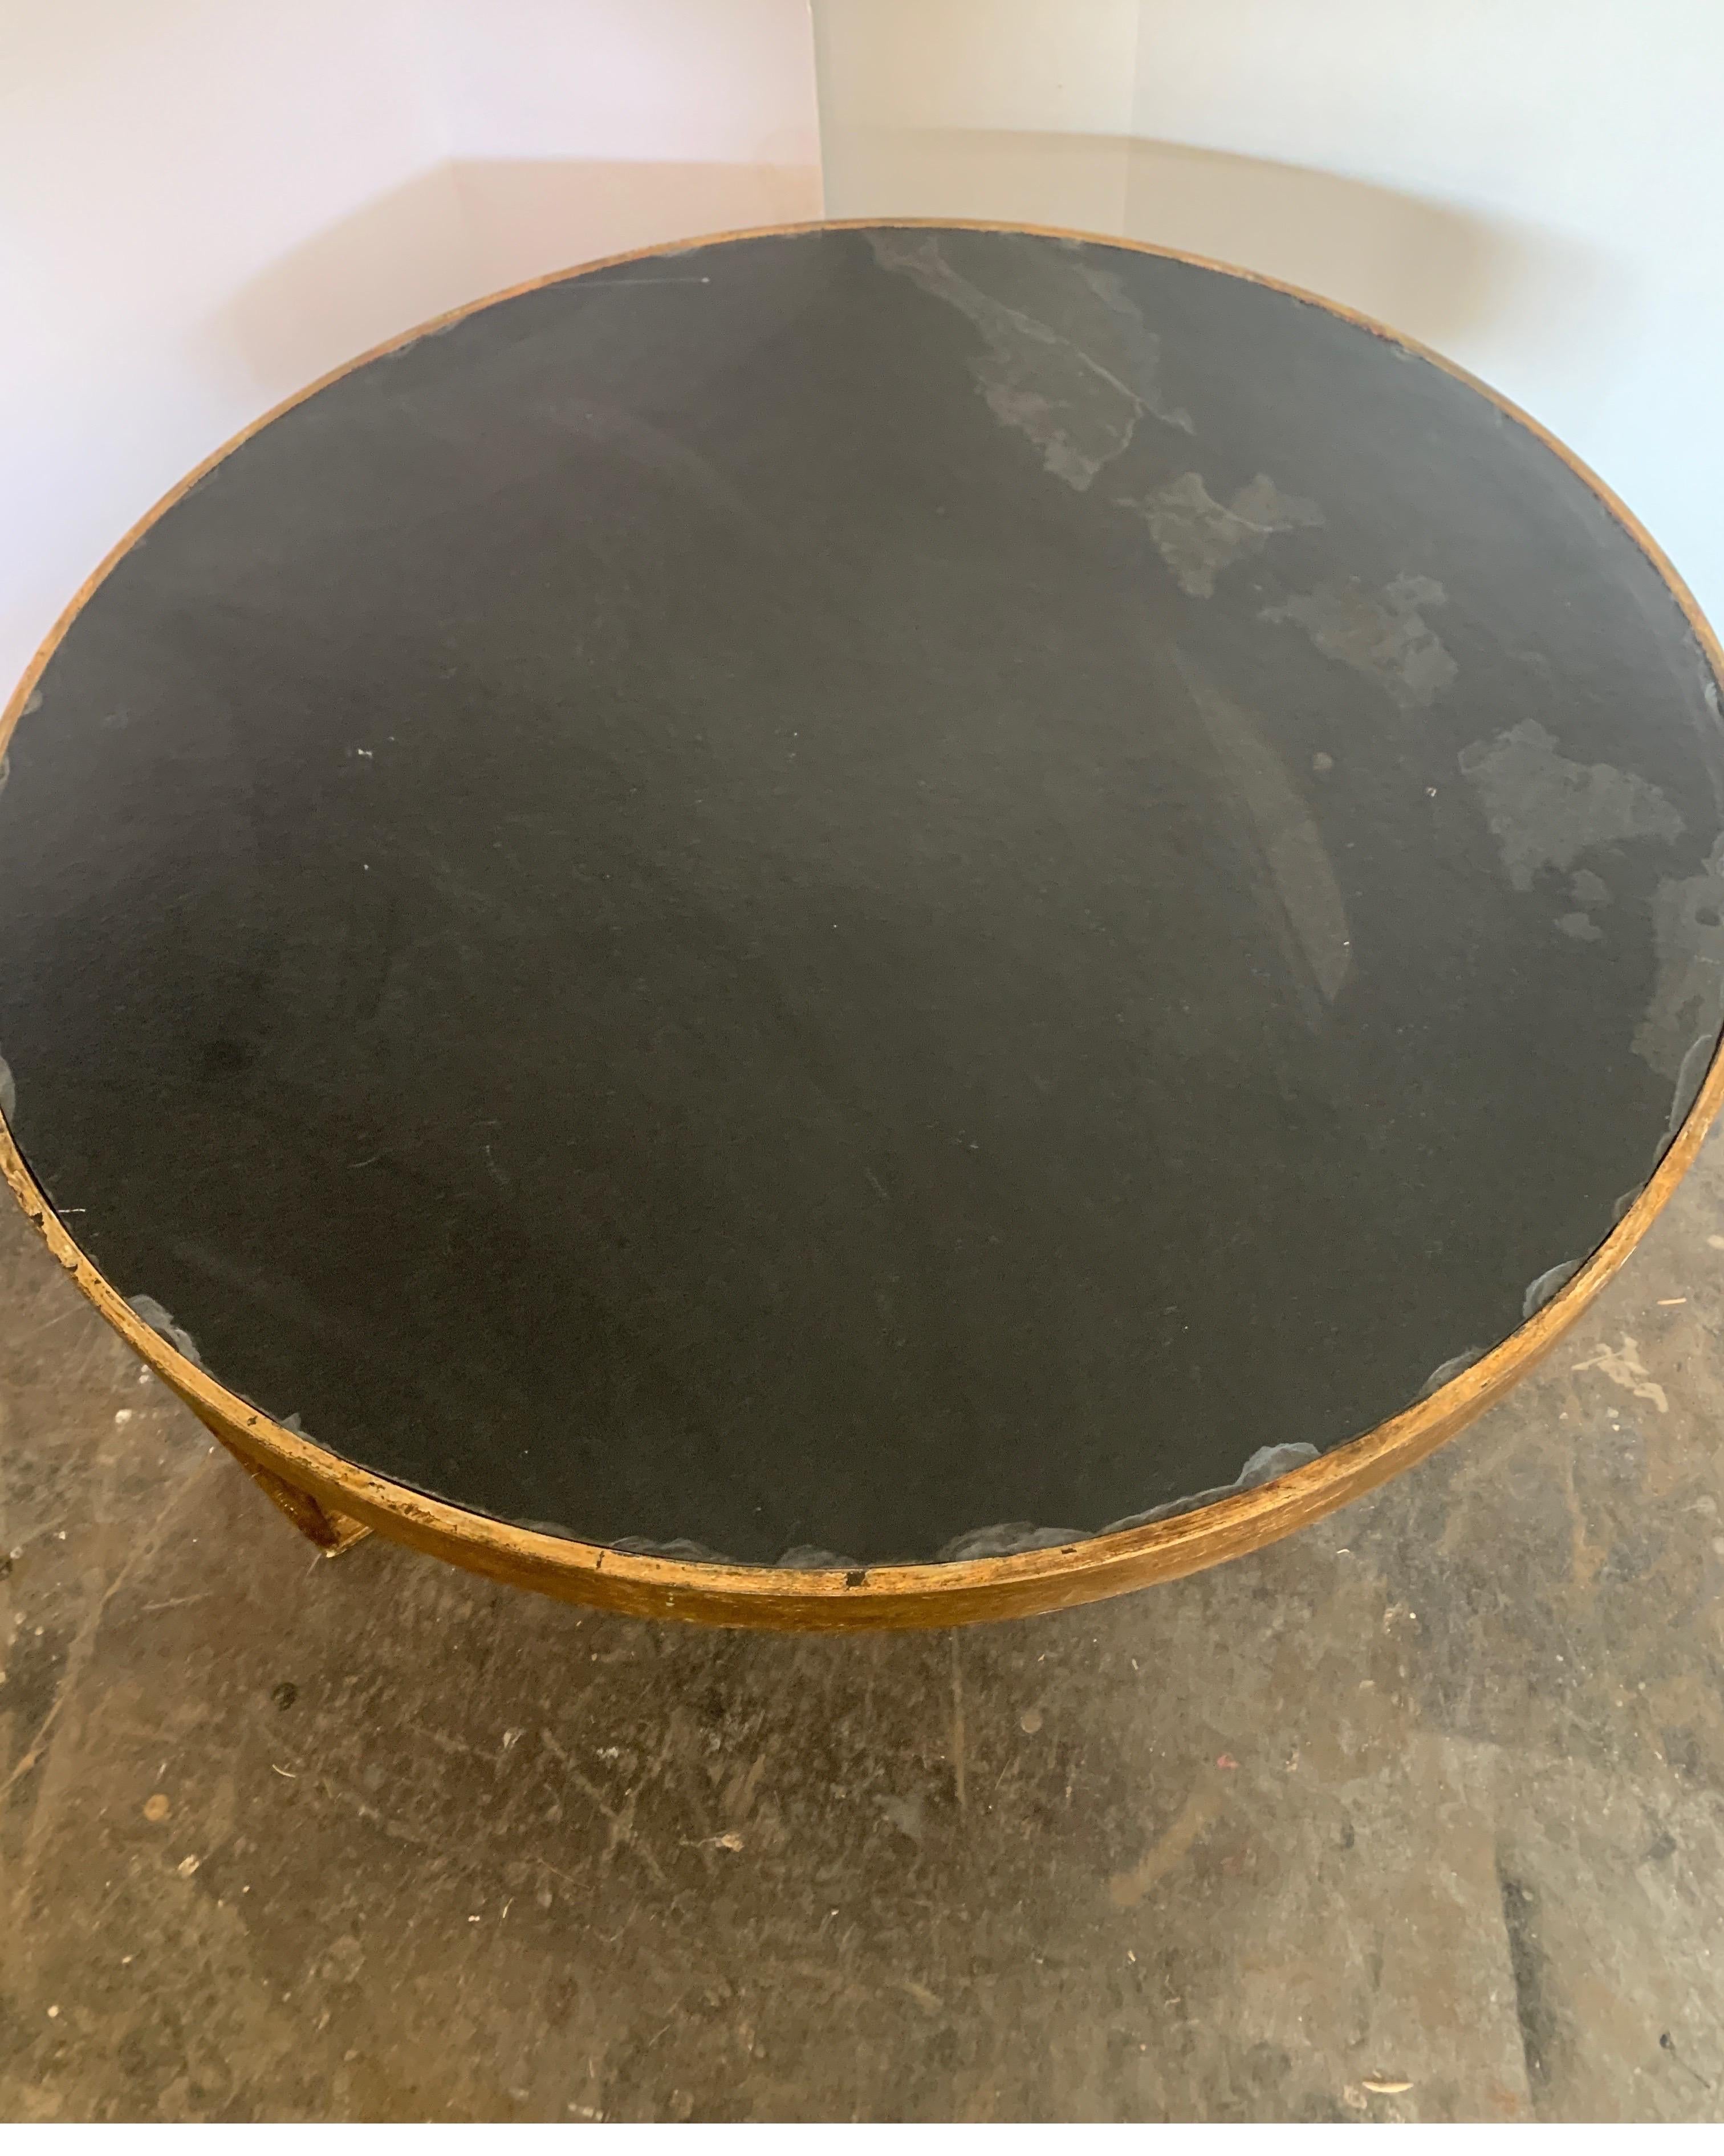 We fabric this table in various sizes. The is perfect between two chairs are as a small coffee/cocktail table.
It's very heavy iron, finished with gold and a beautiful black slate top is inset.